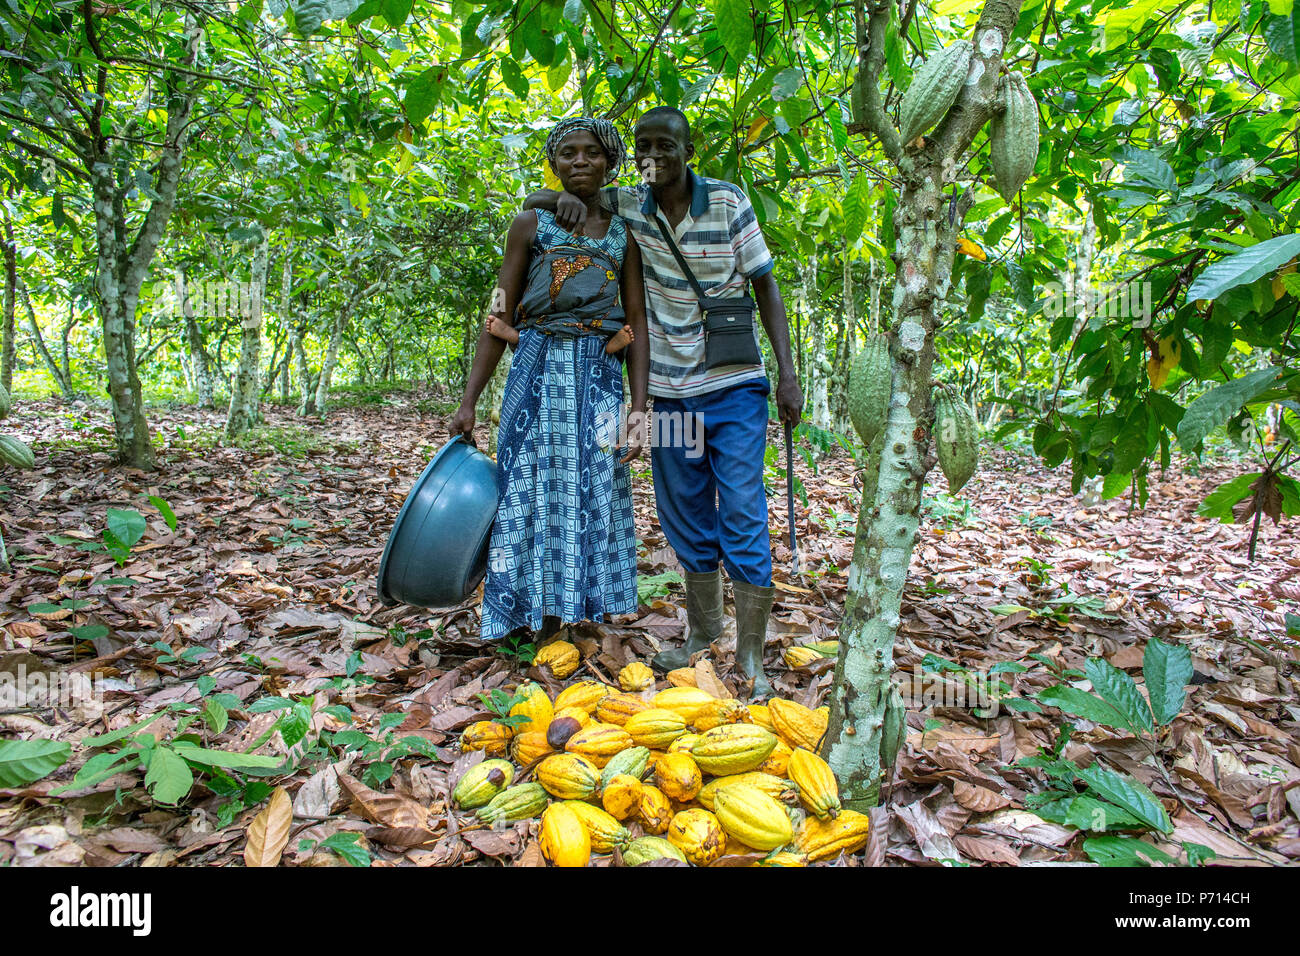 Farmer harvesting cocoa (cacao) with his wife, Ivory Coast, West Africa, Africa Stock Photo